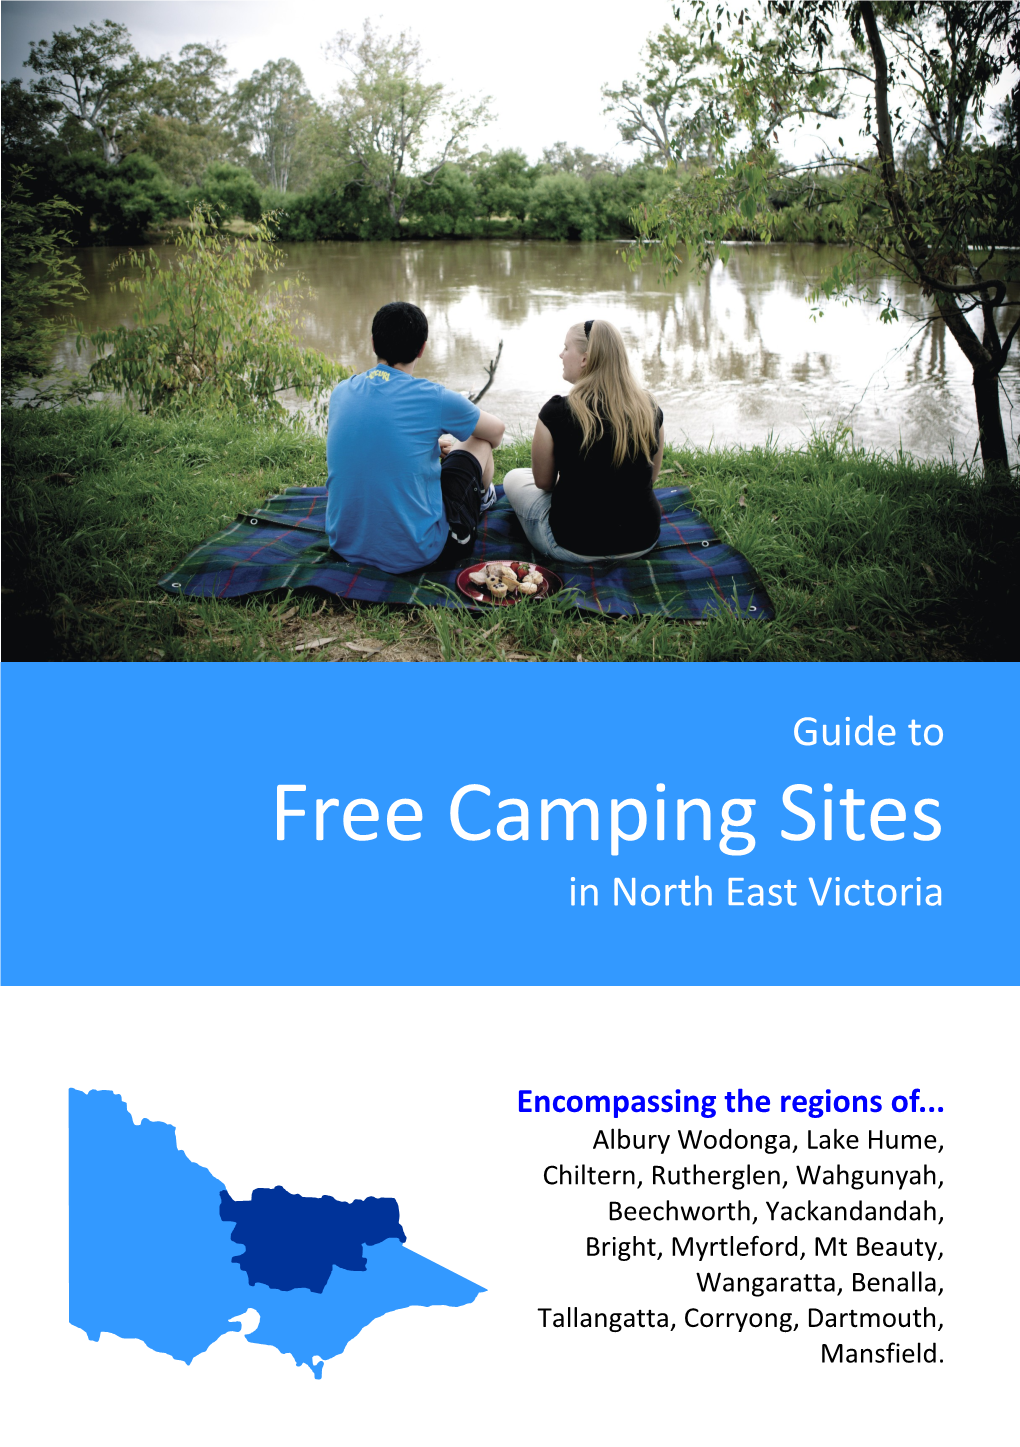 Free Camping Sites in North East Victoria